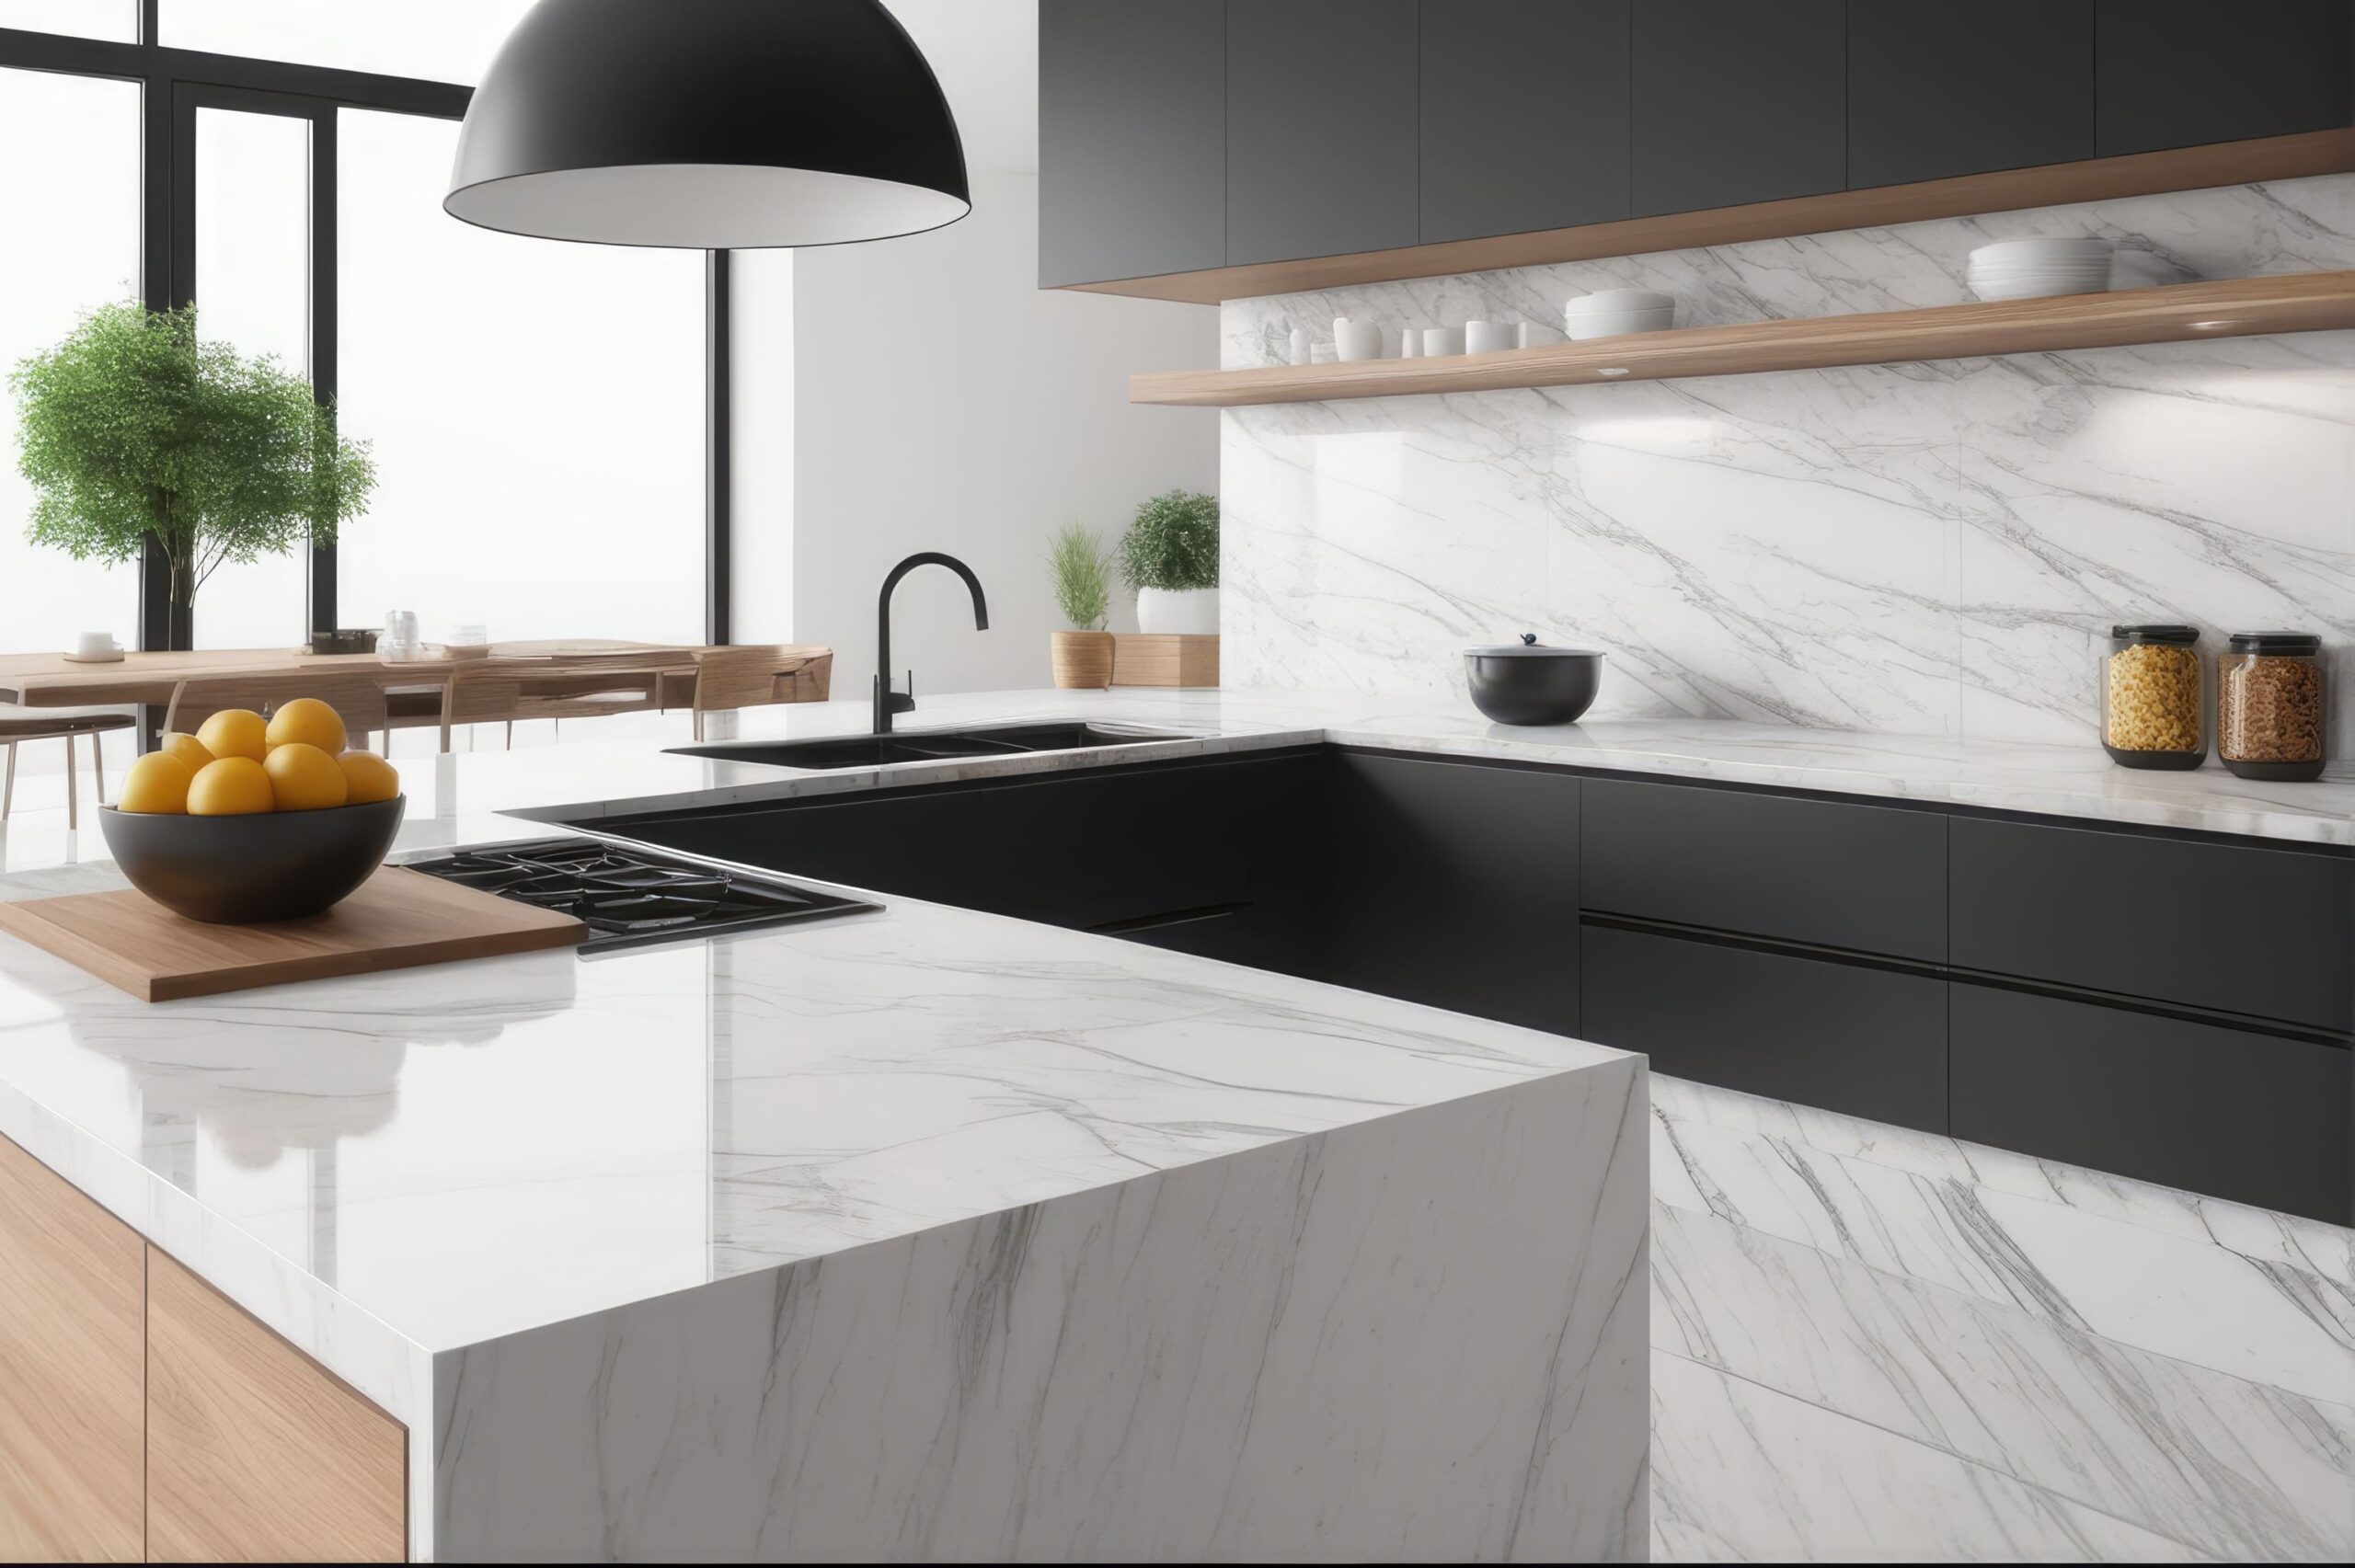 closeup-marble-granite-kitchen-counter-island-product-display-modern-bright-clean-kitchen-space-3d-rendering-3d-illustration